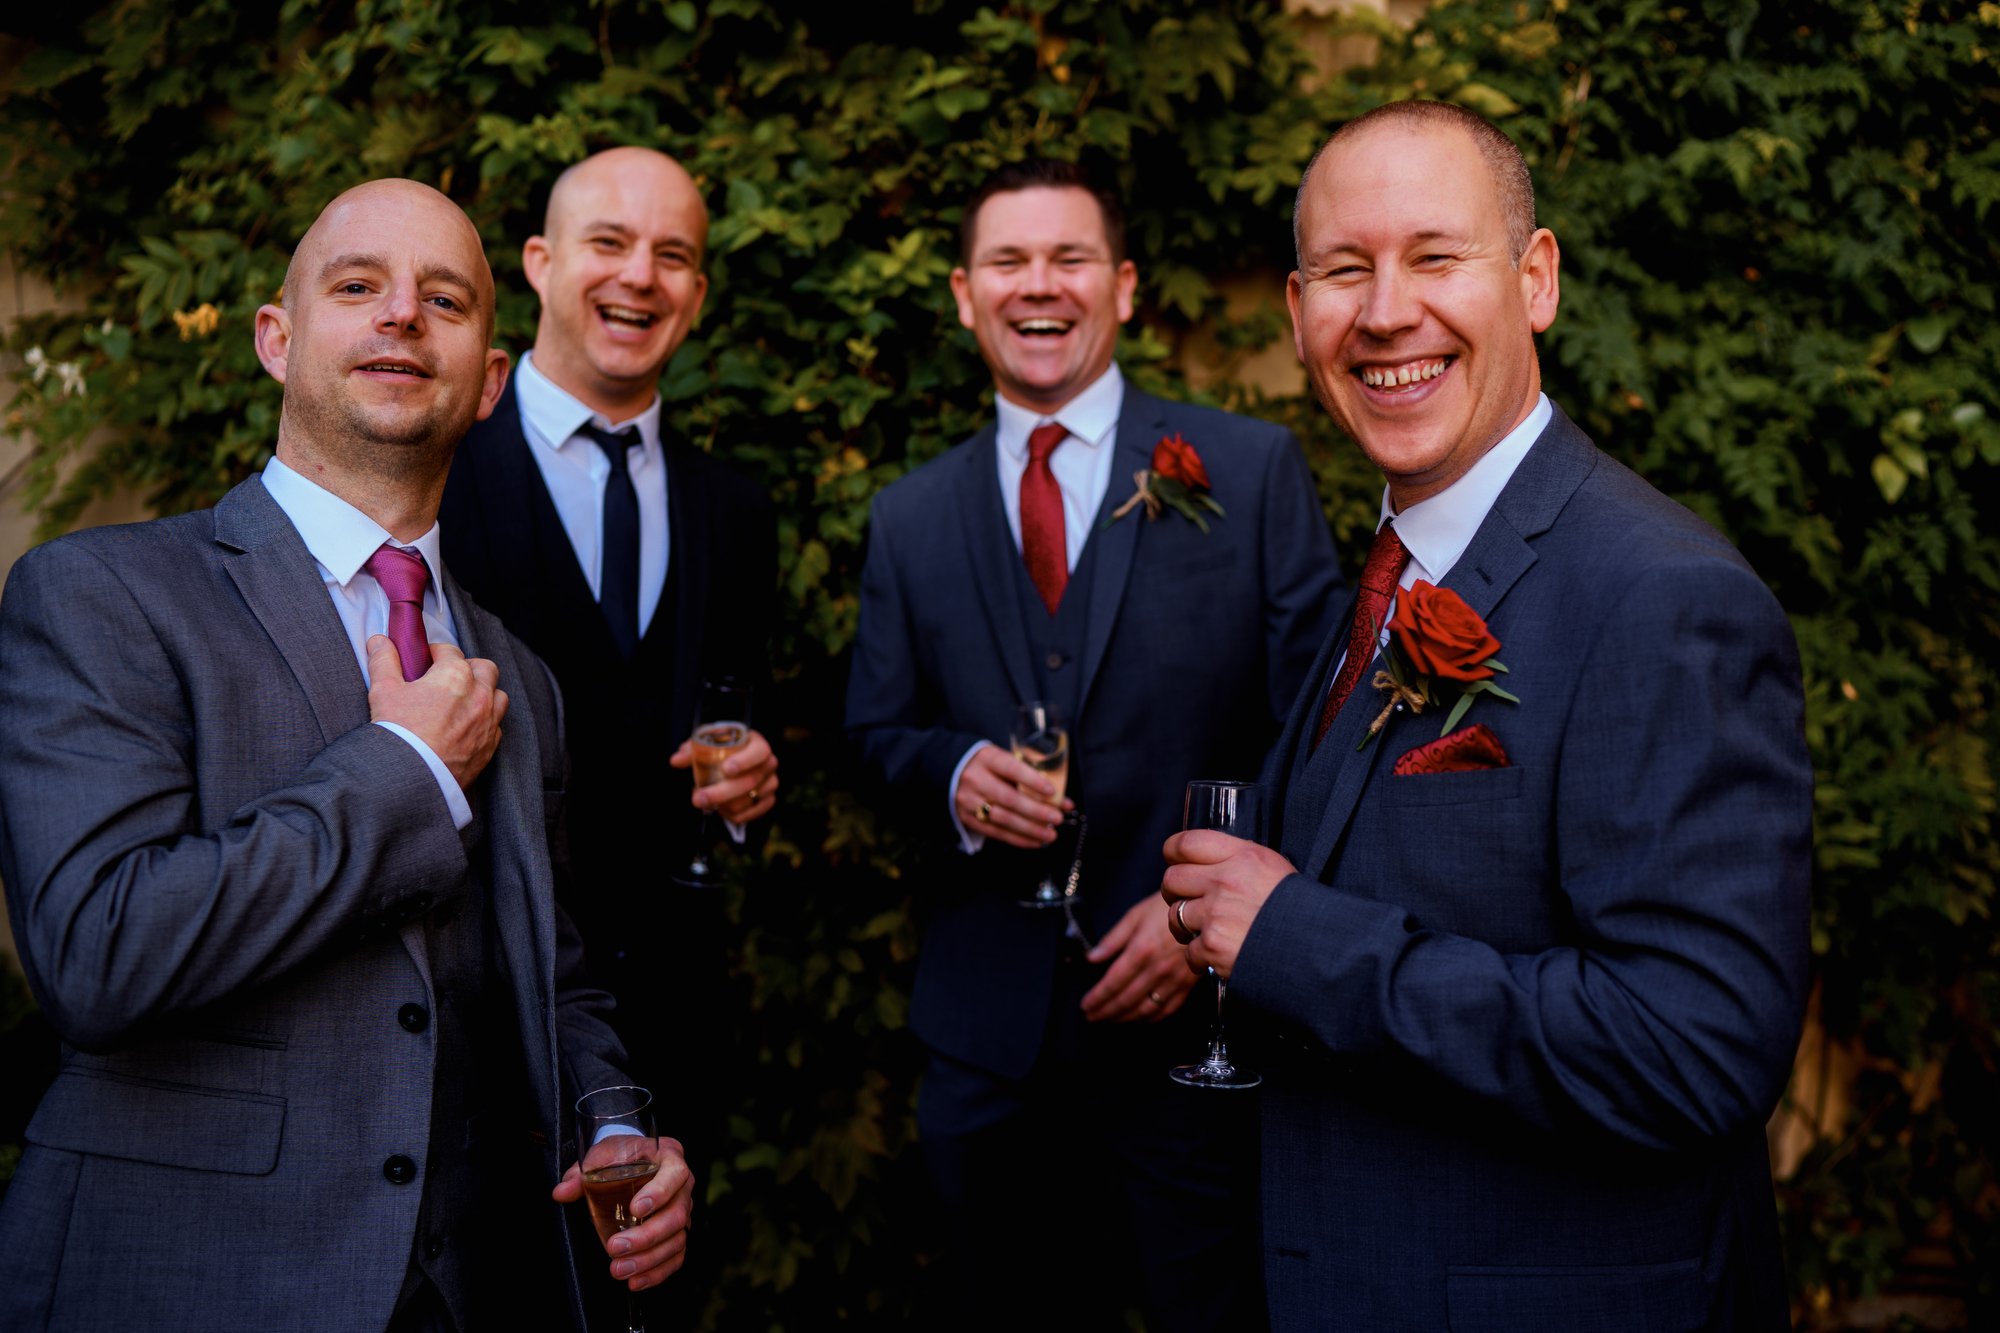 Orchardleigh and elmhay park wedding by arj photography®